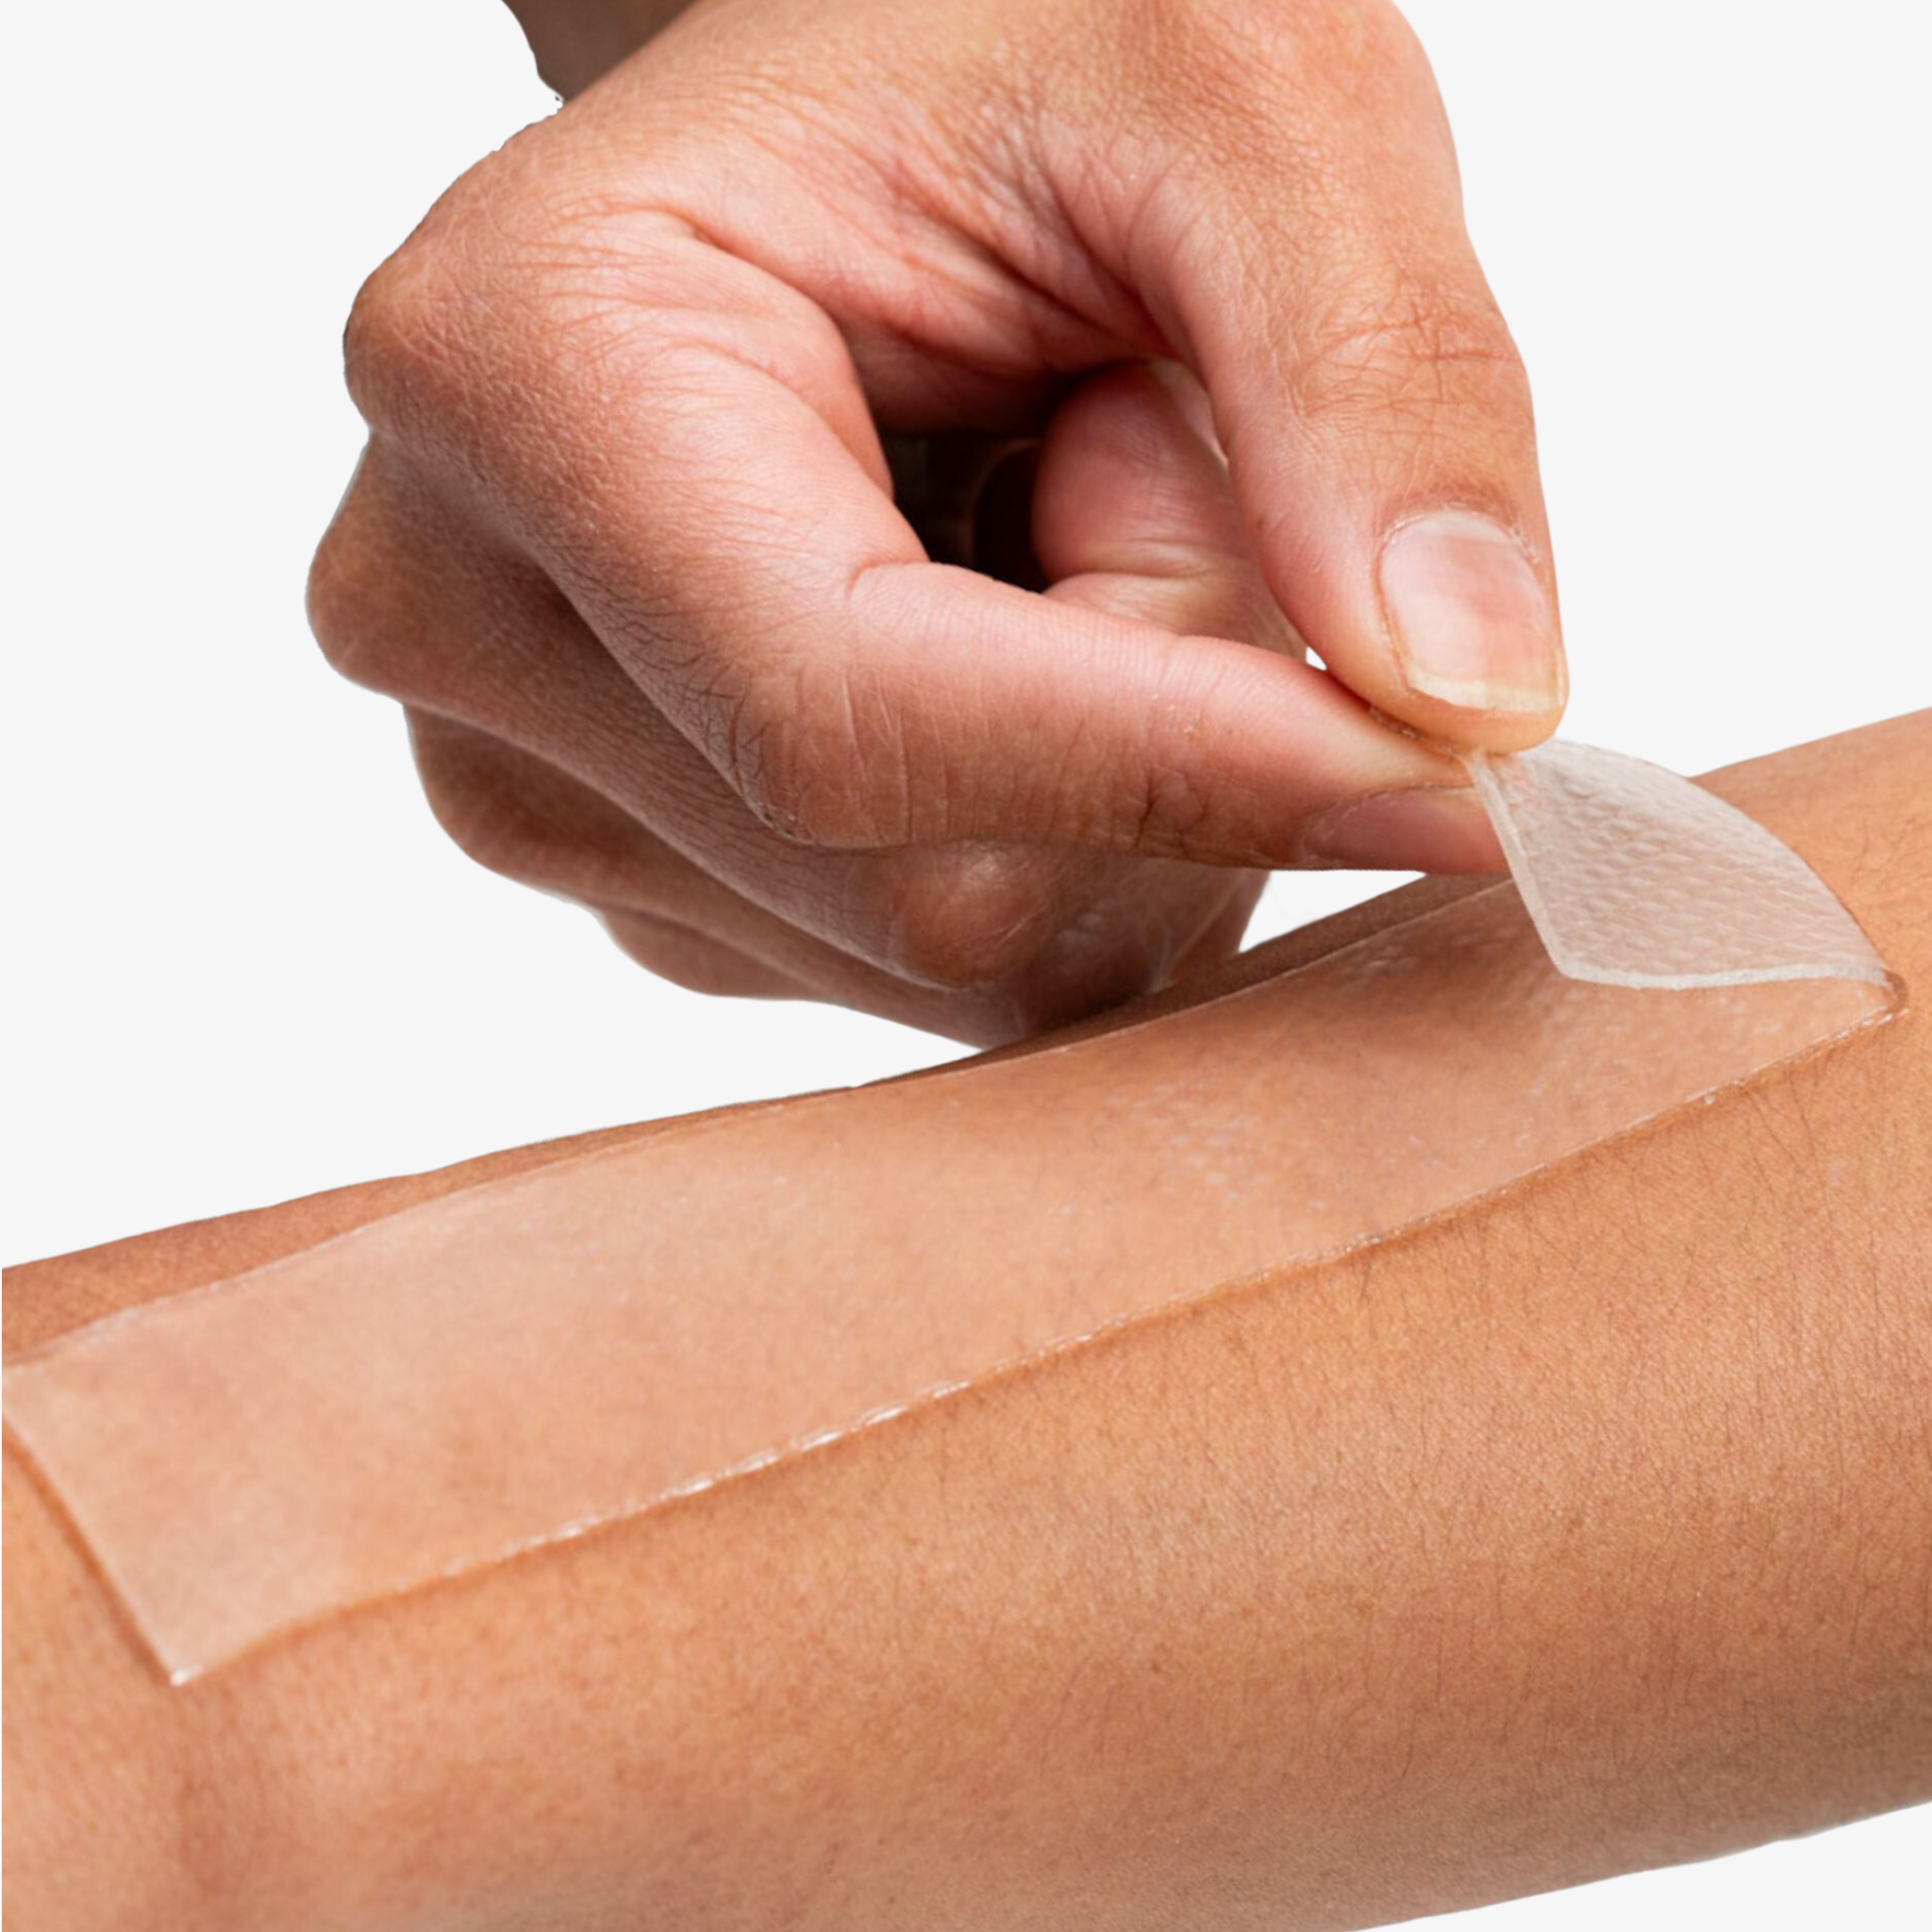 Silicone gel sheeting being applied to white women's arm